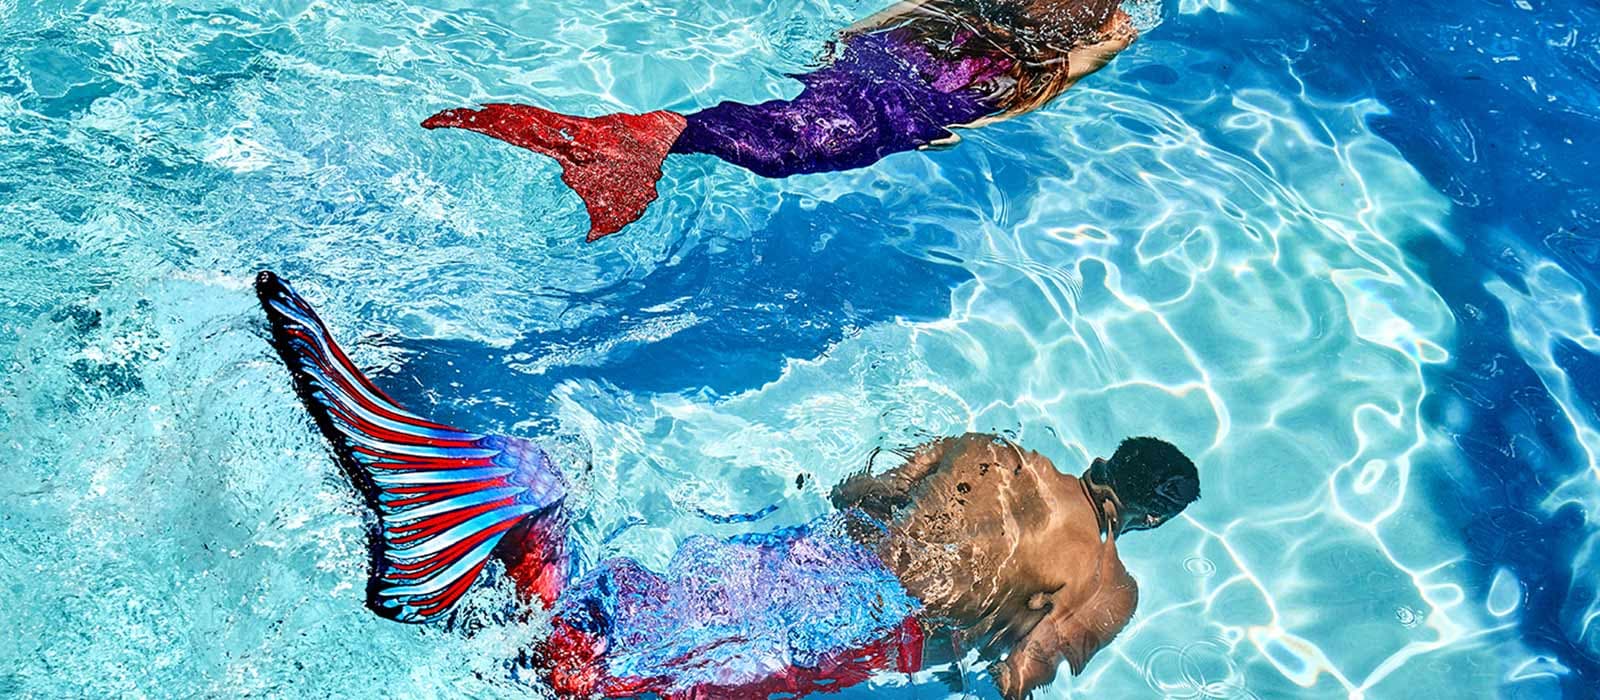 Image with beautiful mermaids under the water